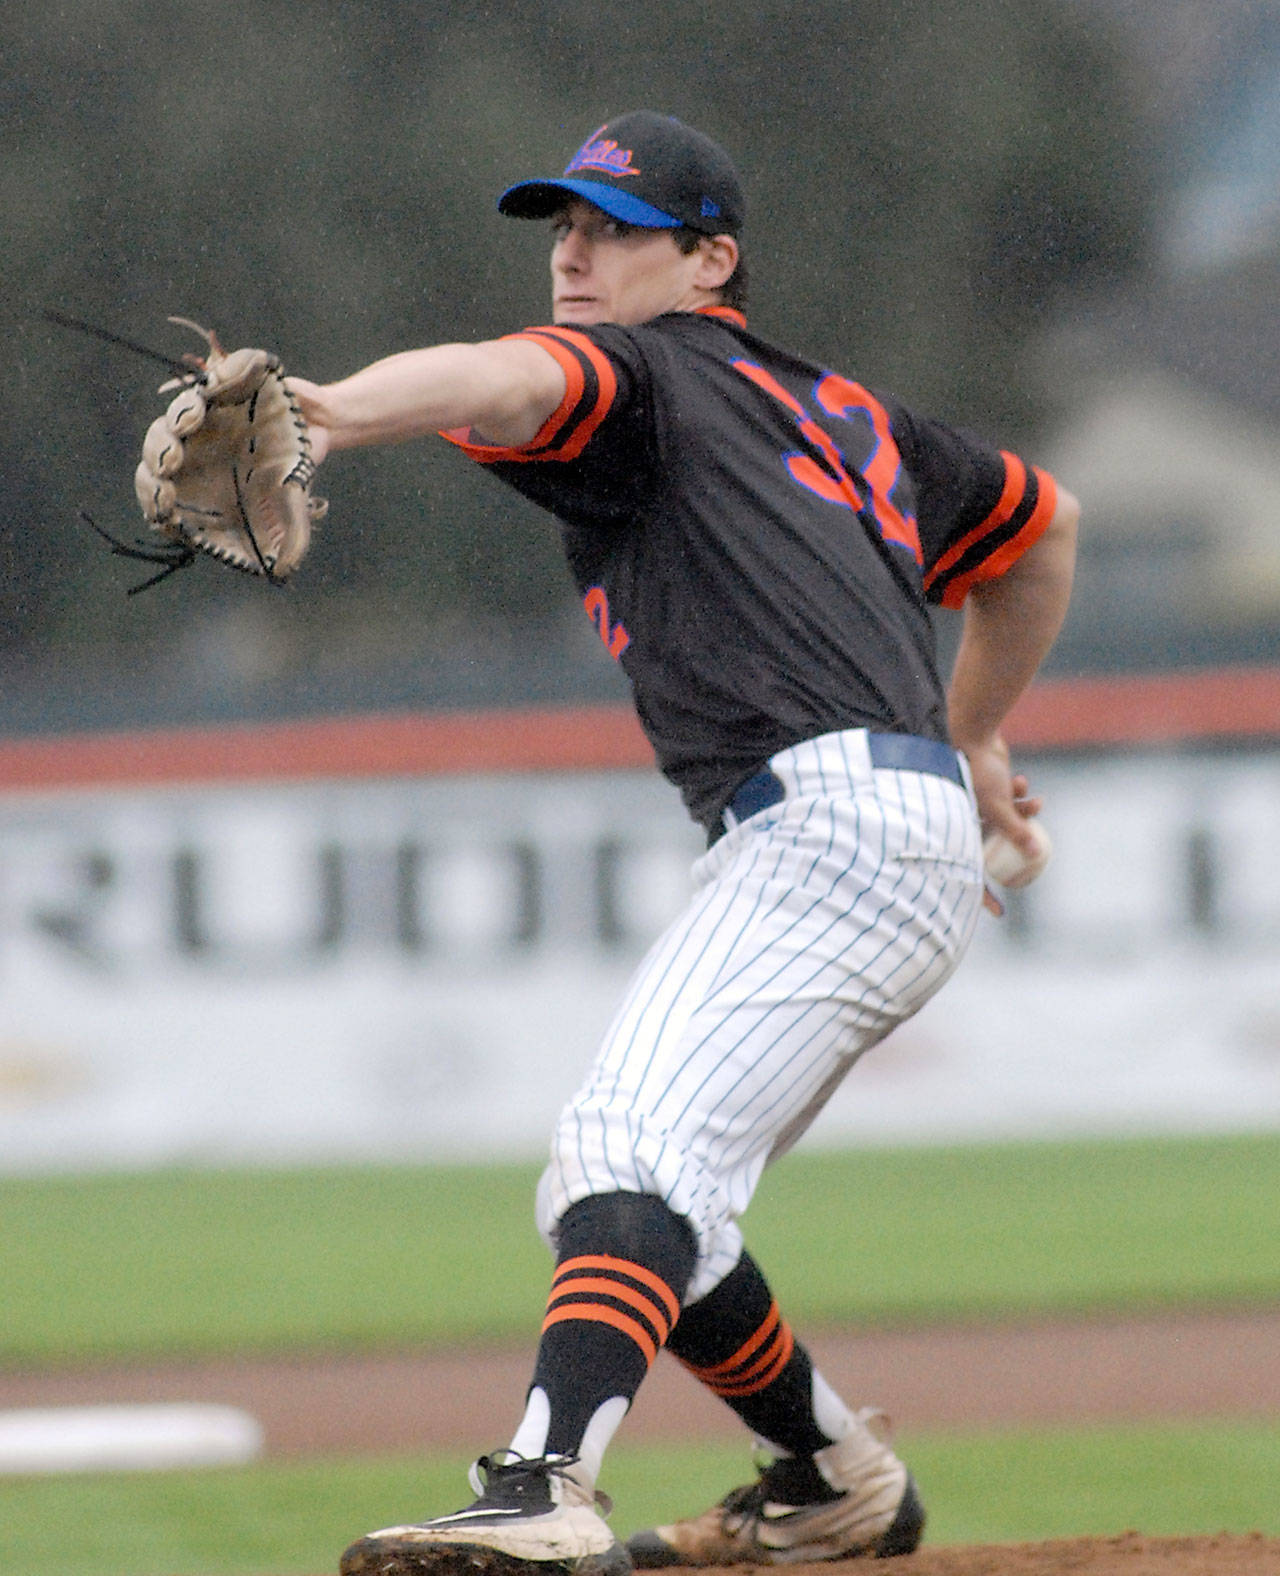 Lefties pitcher Joe Kinsky thows in the first inning against the Cowlitz Bears on a drizzly Wednesday at Port Angeles Civic Field. Kinsky took a no-hitter into the seventh inning.                                 Keith Thorpe/Peninsula Daily News